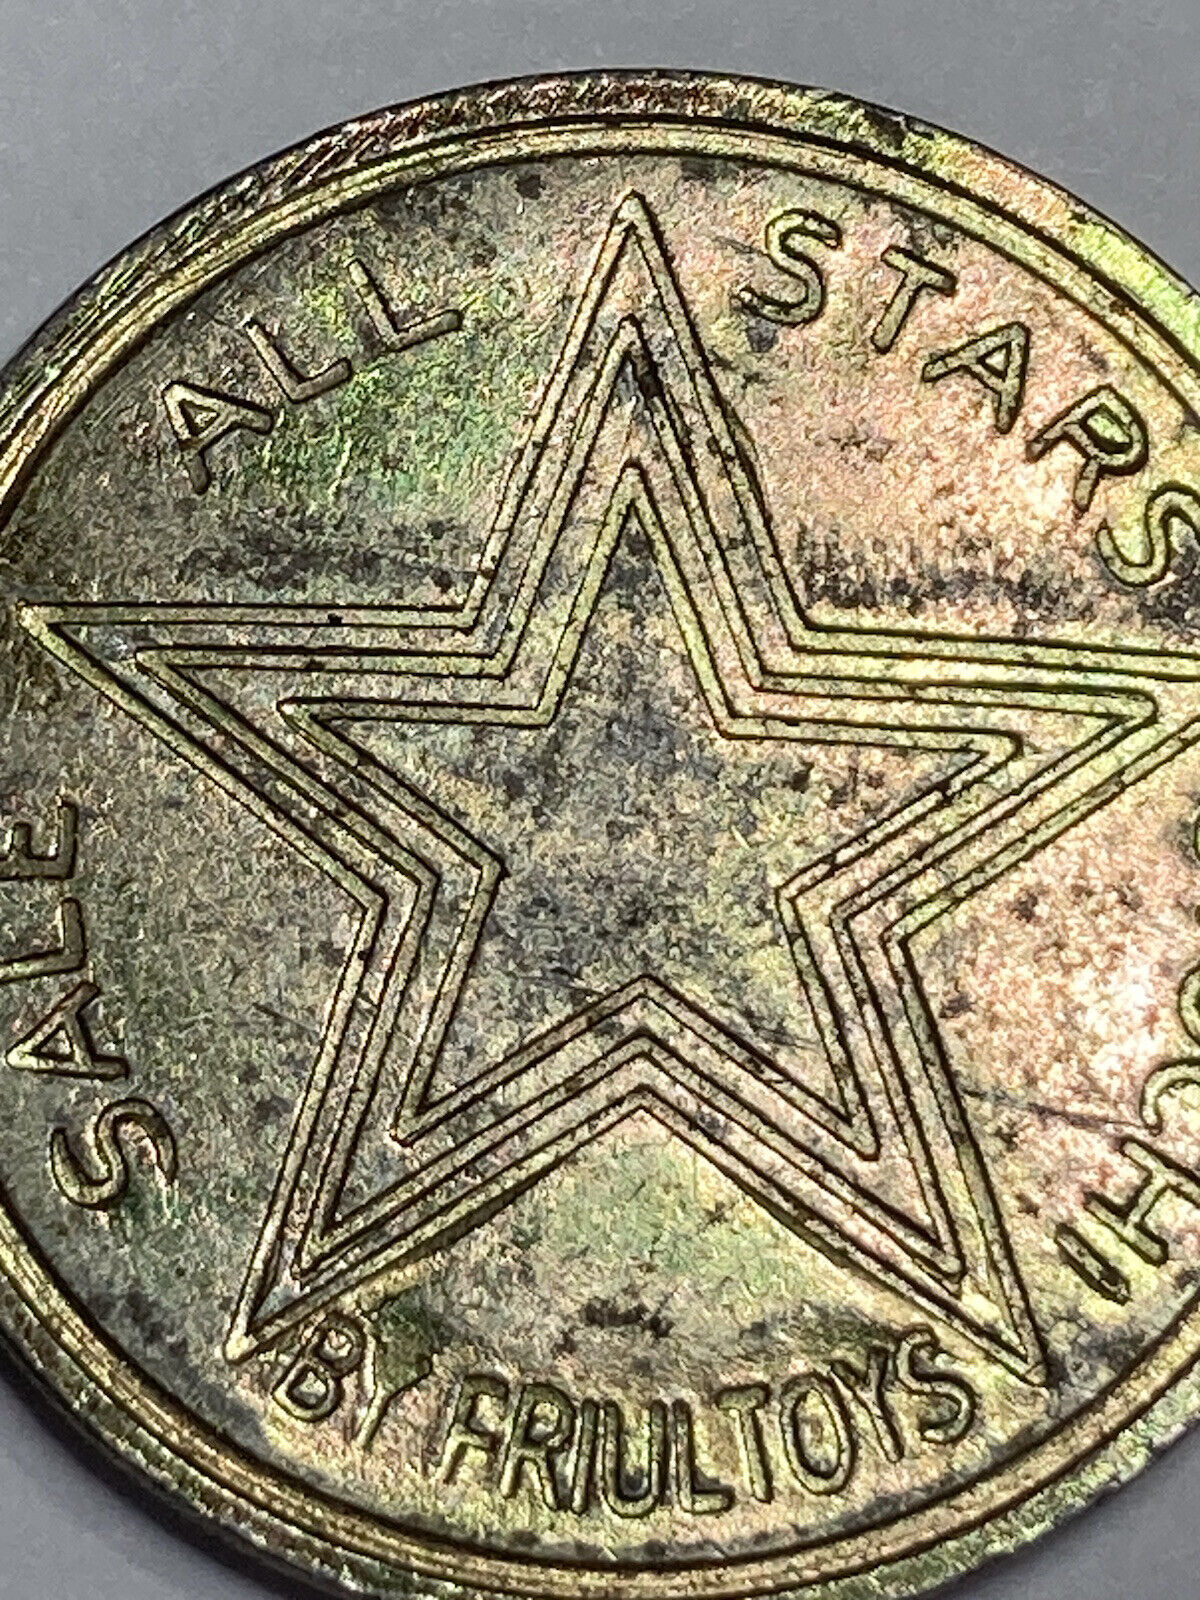 EXTREMELY RARE ITALIAN \'ALL STARS\' VIDEO GAME ARCADE TOKEN - SLOTTED BACK -LOOK